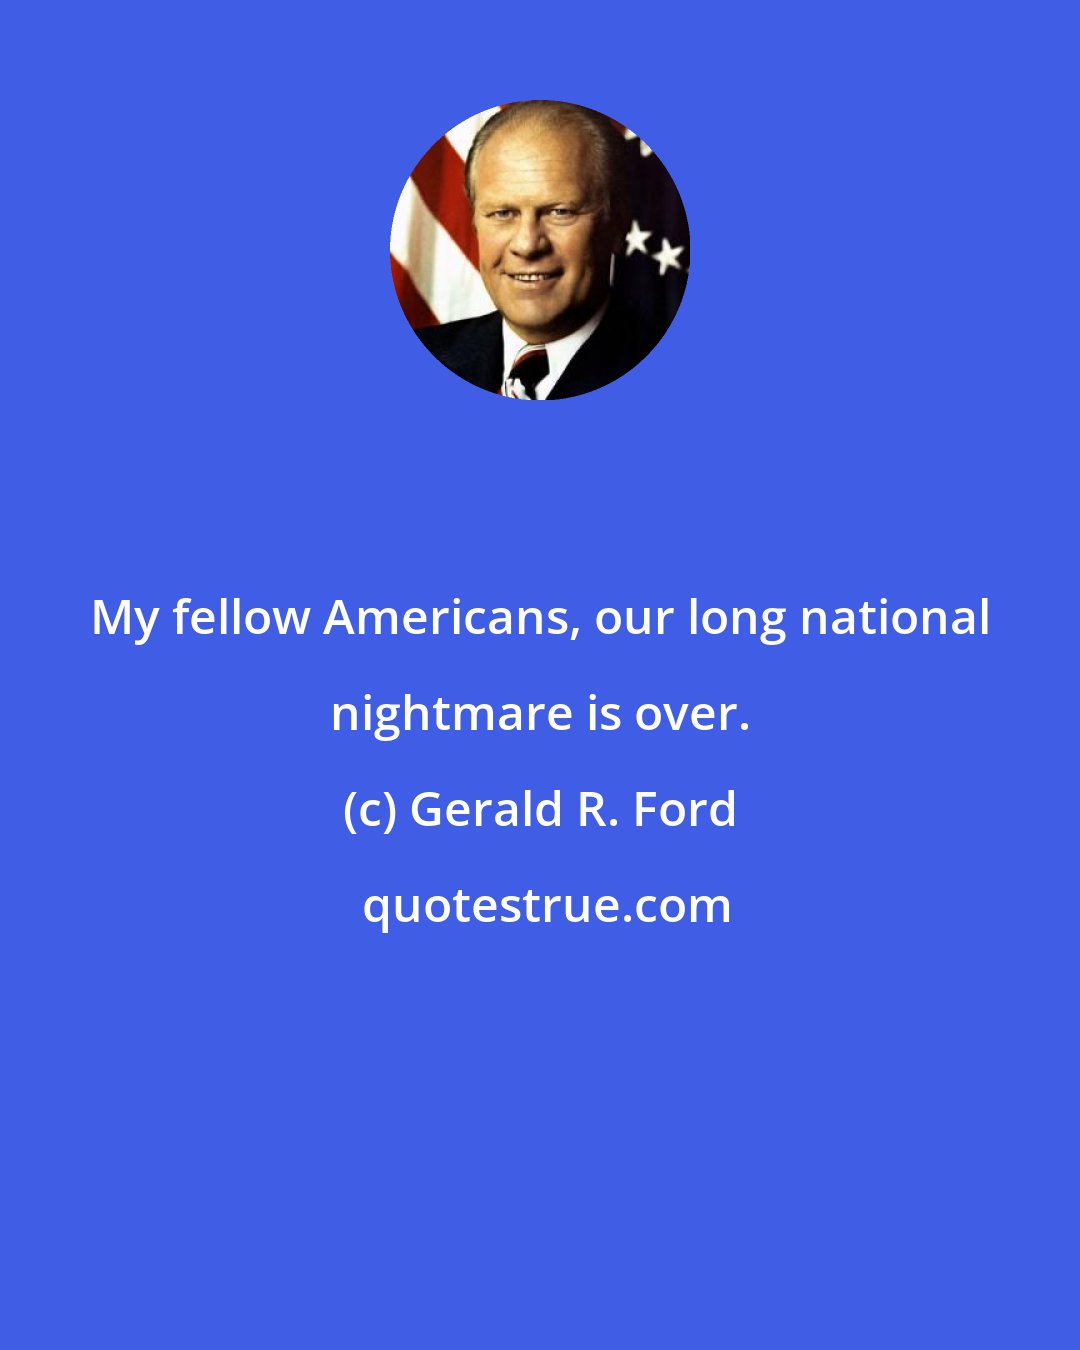 Gerald R. Ford: My fellow Americans, our long national nightmare is over.